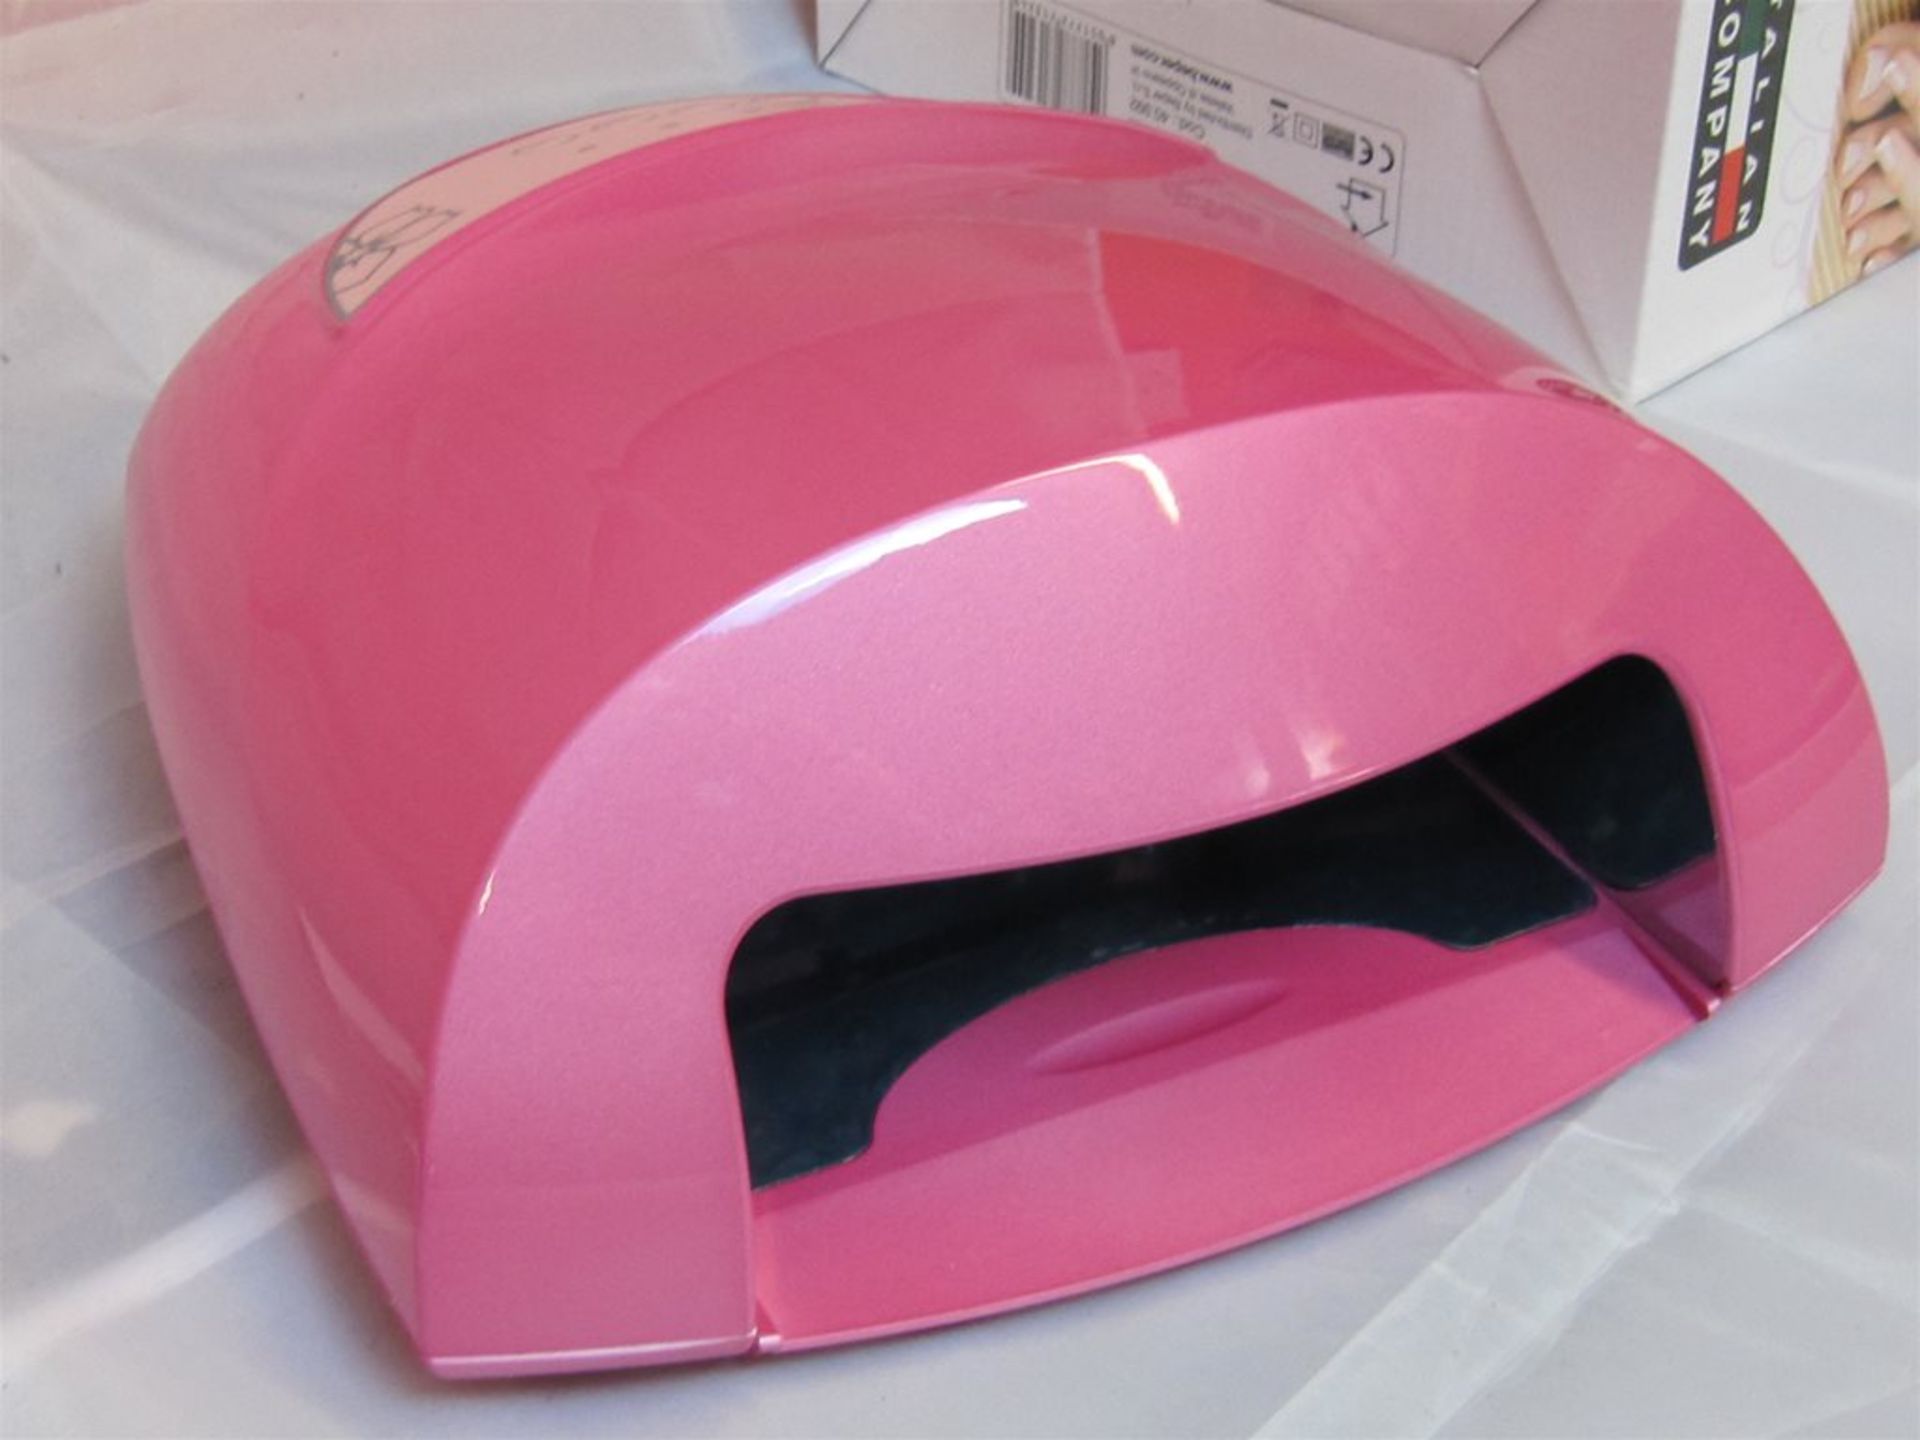 158) Beper LED Nail Lamp. 12w Rapid Dry Time. No vat on Hammer. - Image 4 of 4